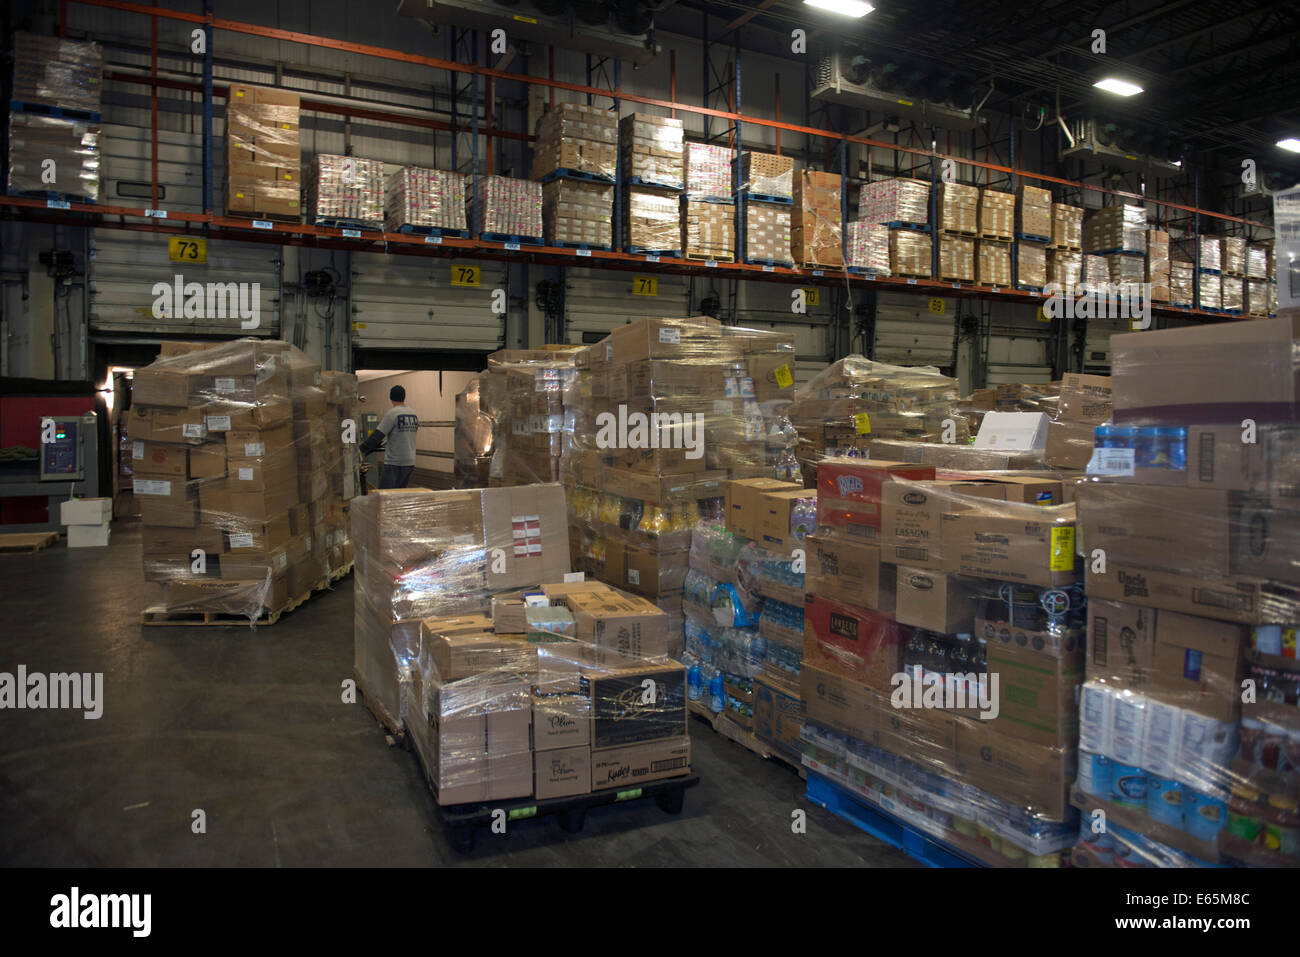 Refrigerated area in giant warehouse of food distributor Bozzuto's.  150 trucks supply IGA and other grocery stores. Stock Photo